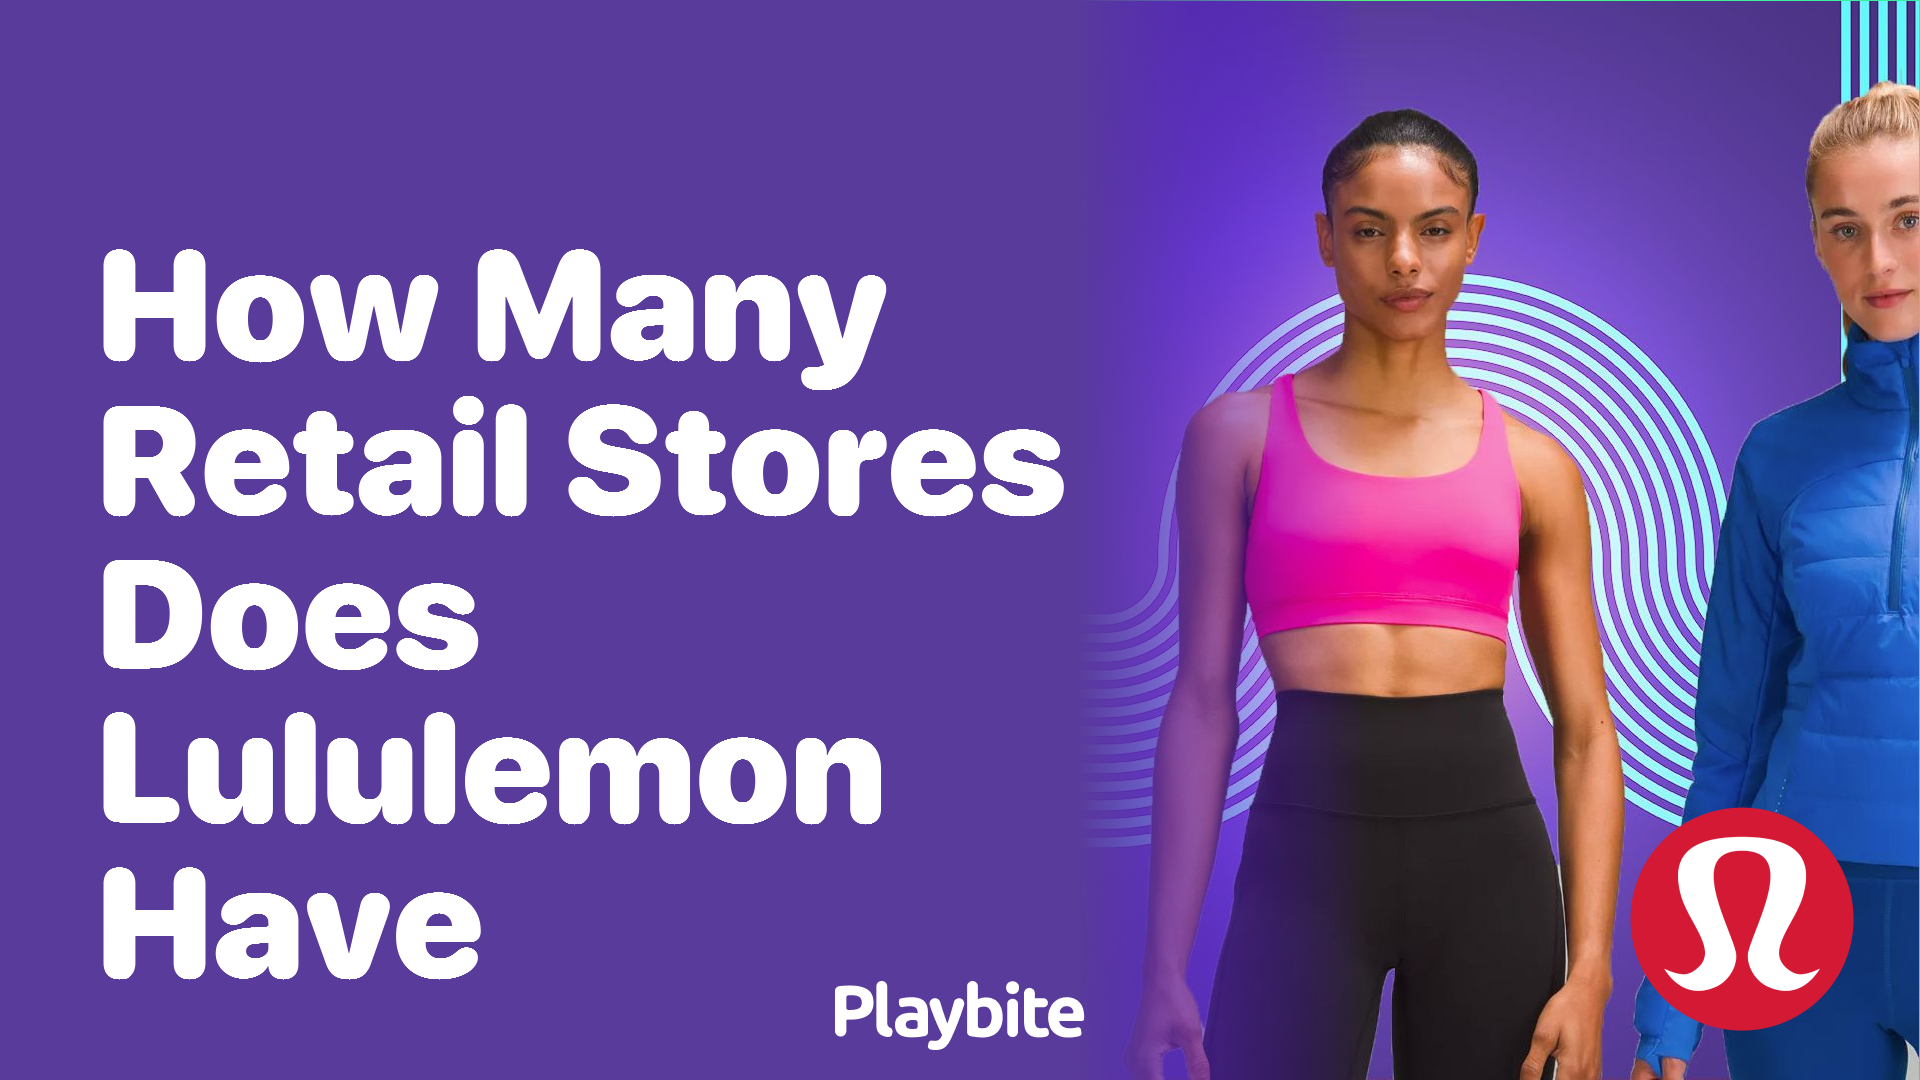 How Many Retail Stores Does Lululemon Have? - Playbite